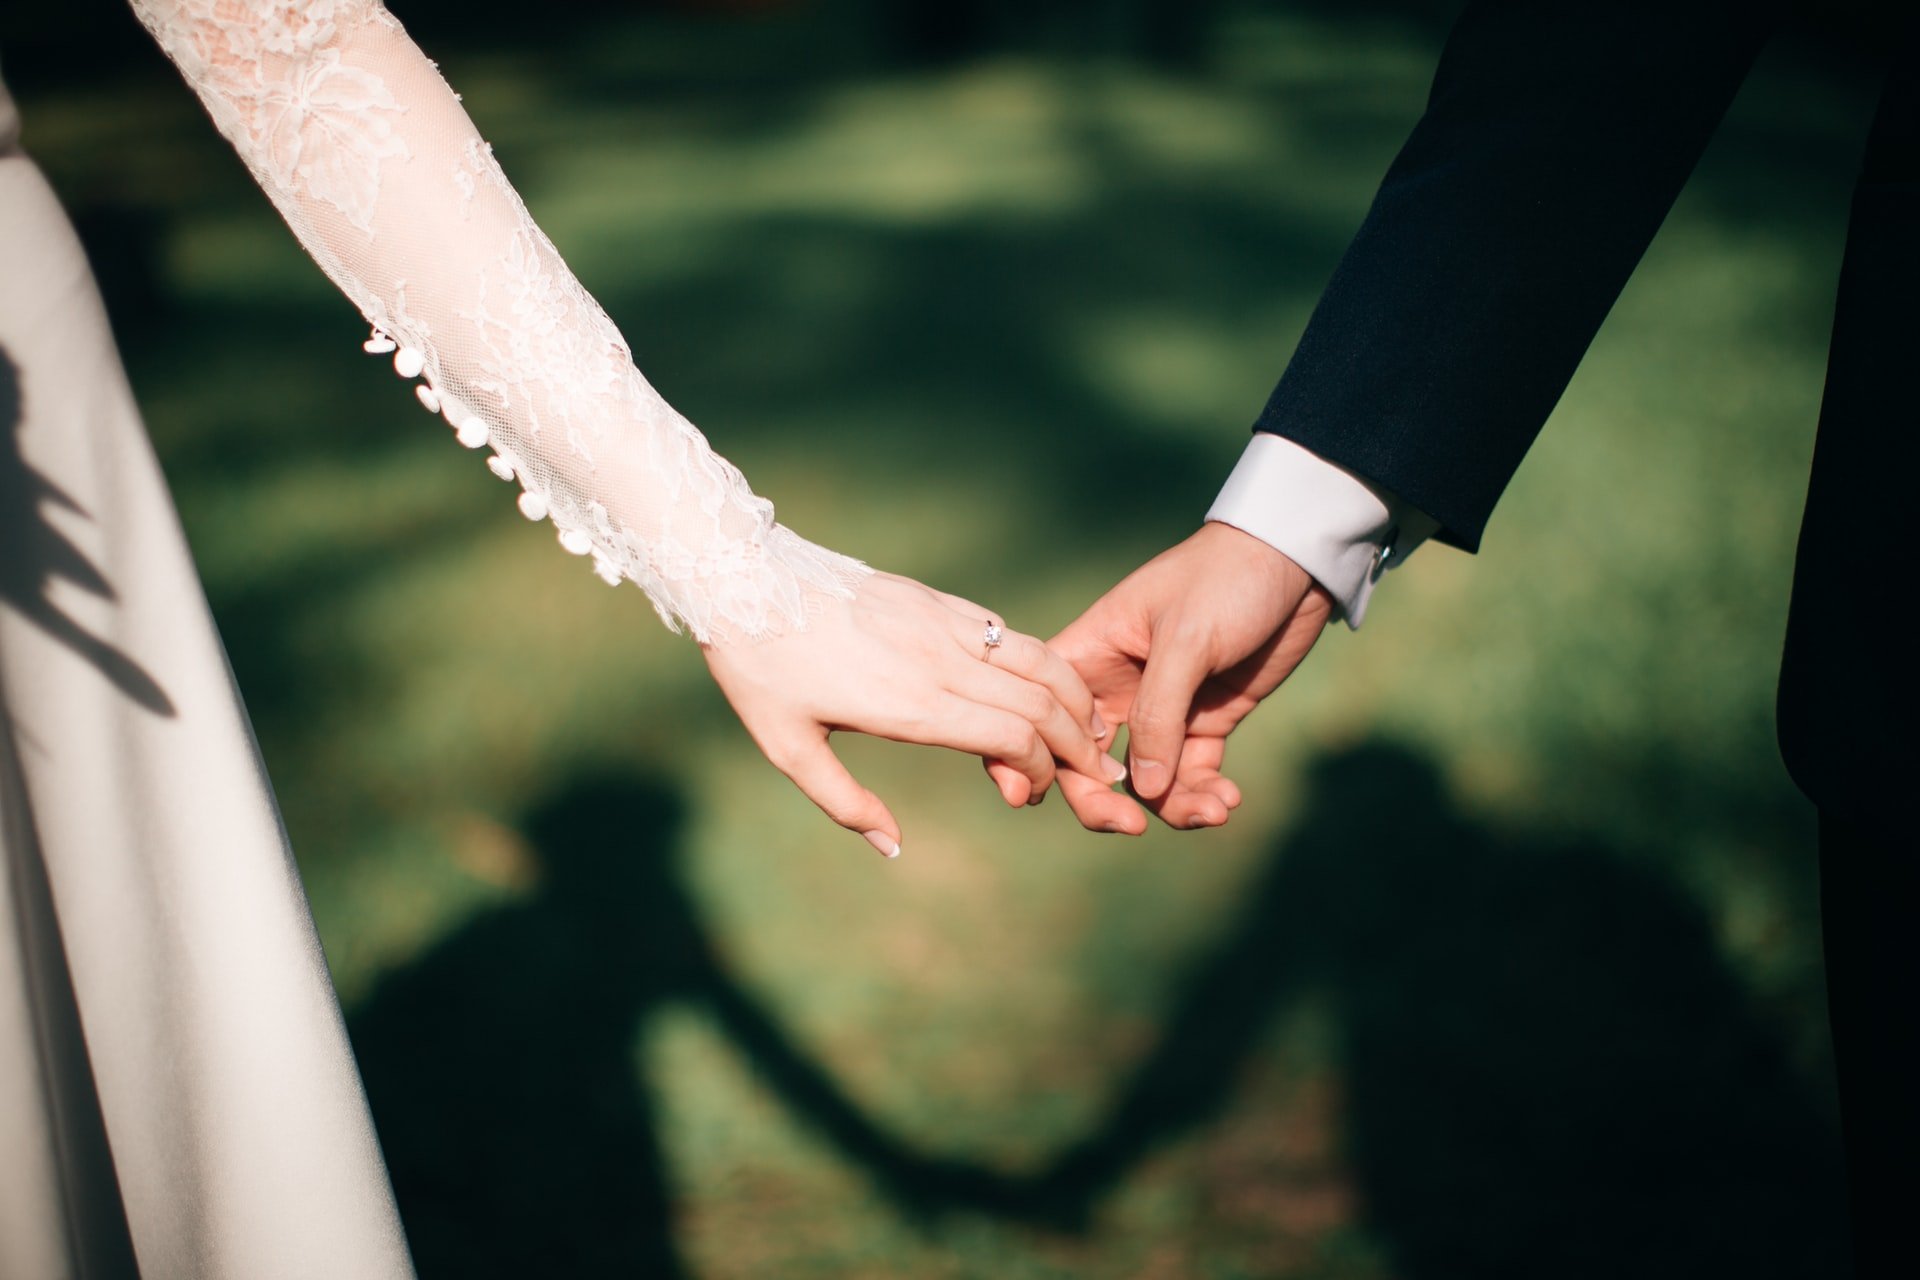 Years later, they got married. | Source: Unsplash